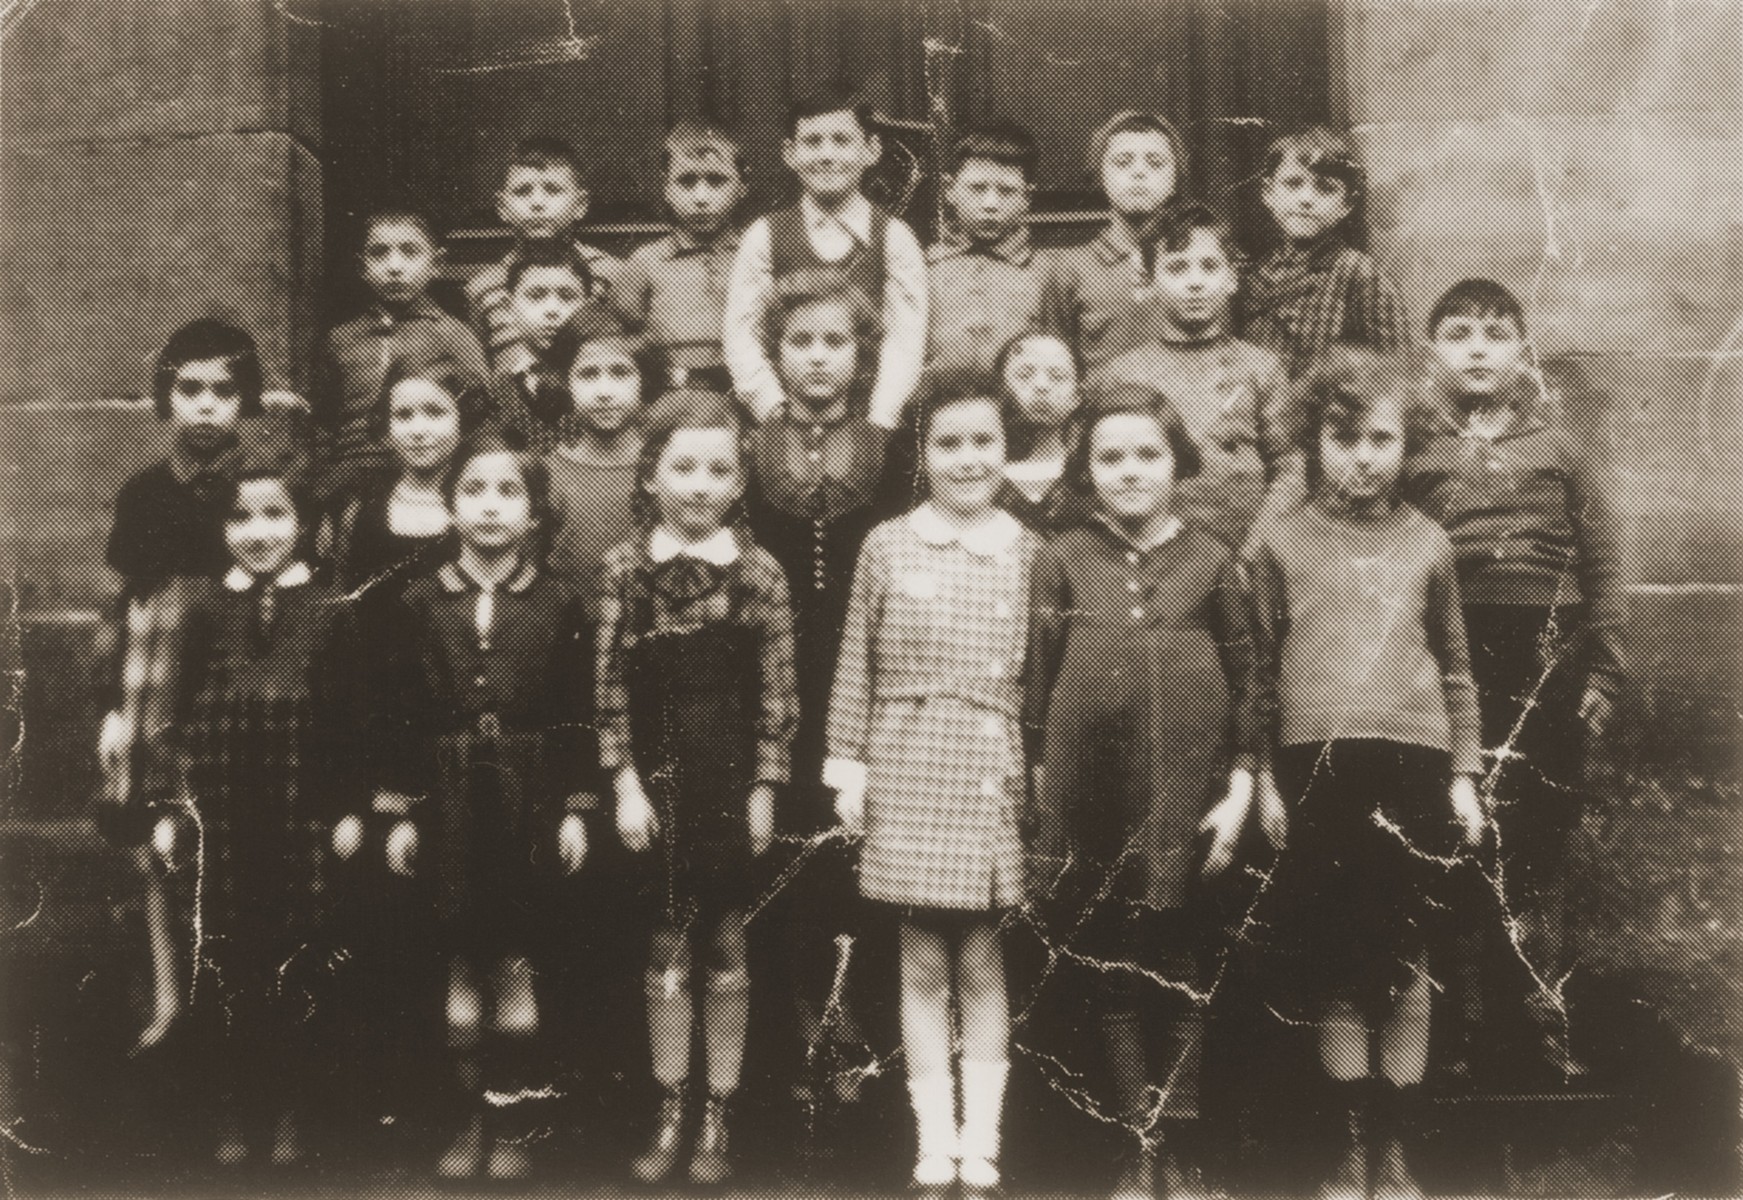 Group portrait of students at the Jewish primary school in Fuerth.